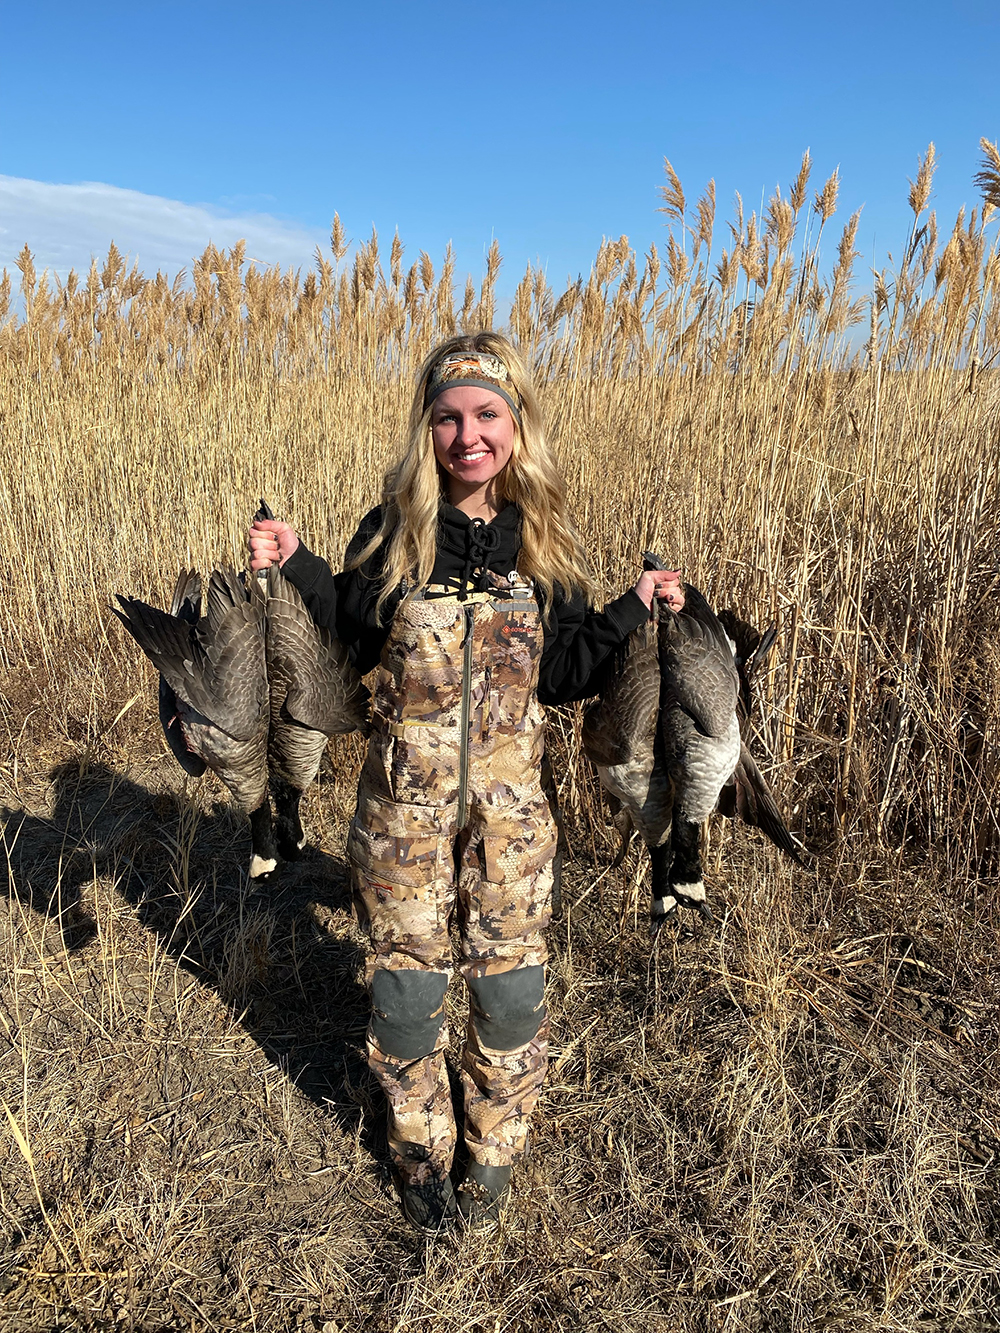 Angela Cook joins Delta Waterfowl as a Communications Intern.